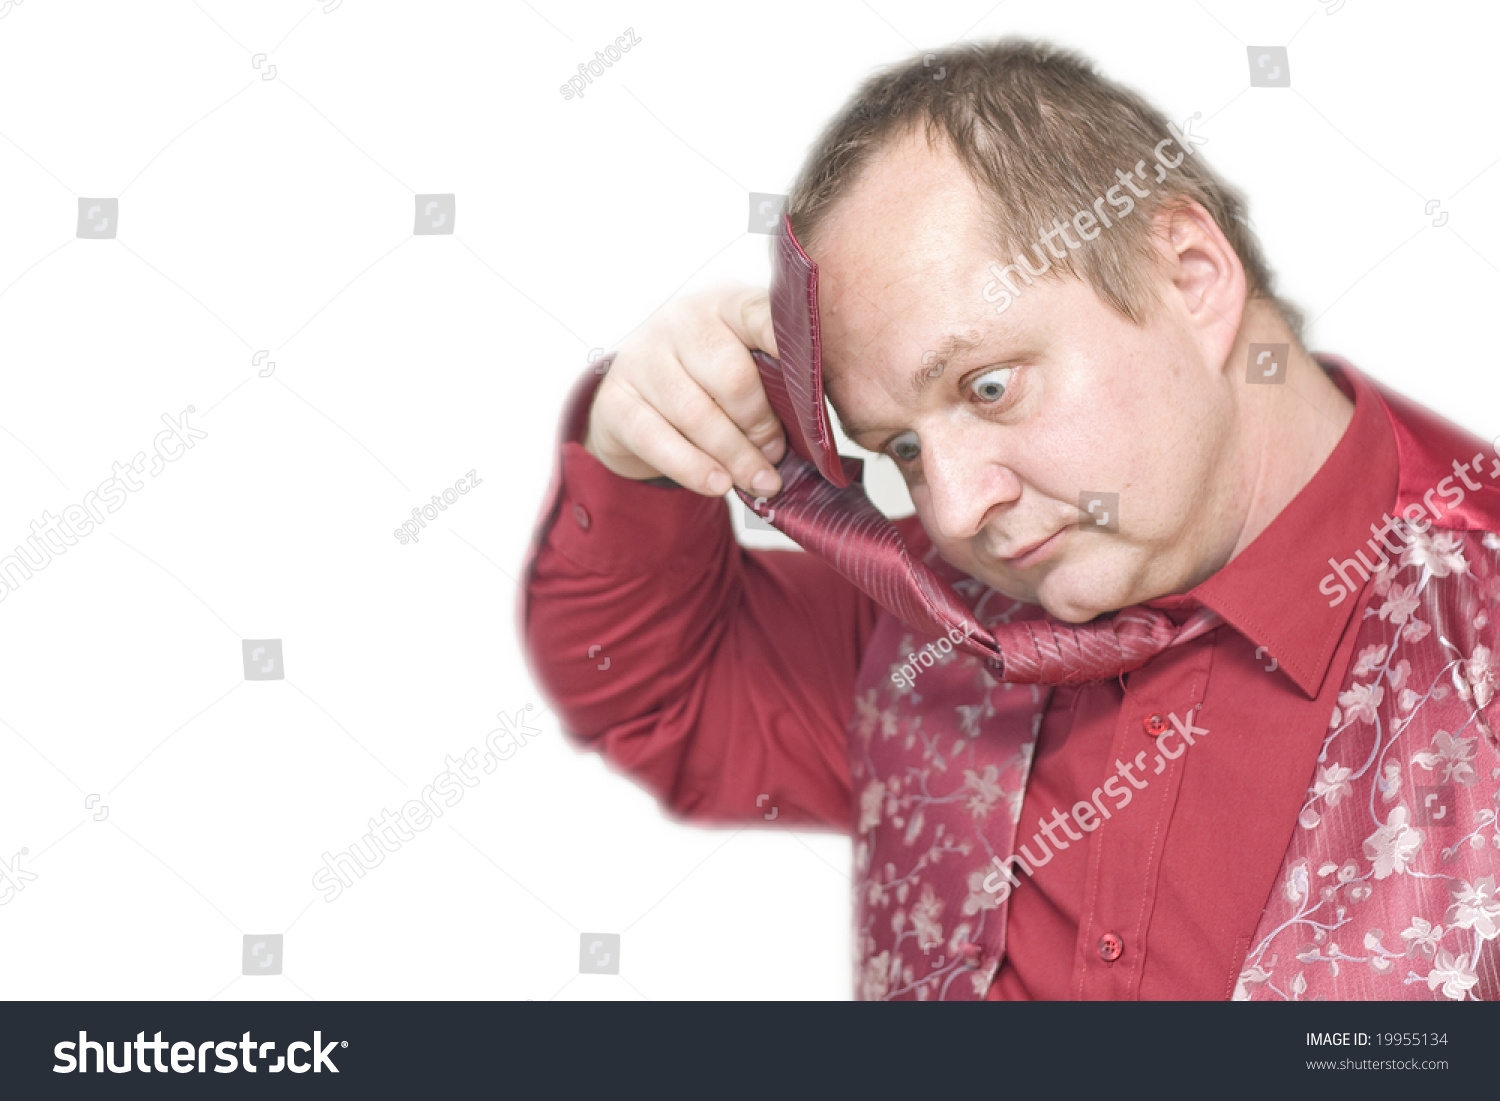 stock-photo-young-surprised-businessman-is-wiping-off-sweat-from-his-forehead-he-is-using-his-tie-19955134.jpg